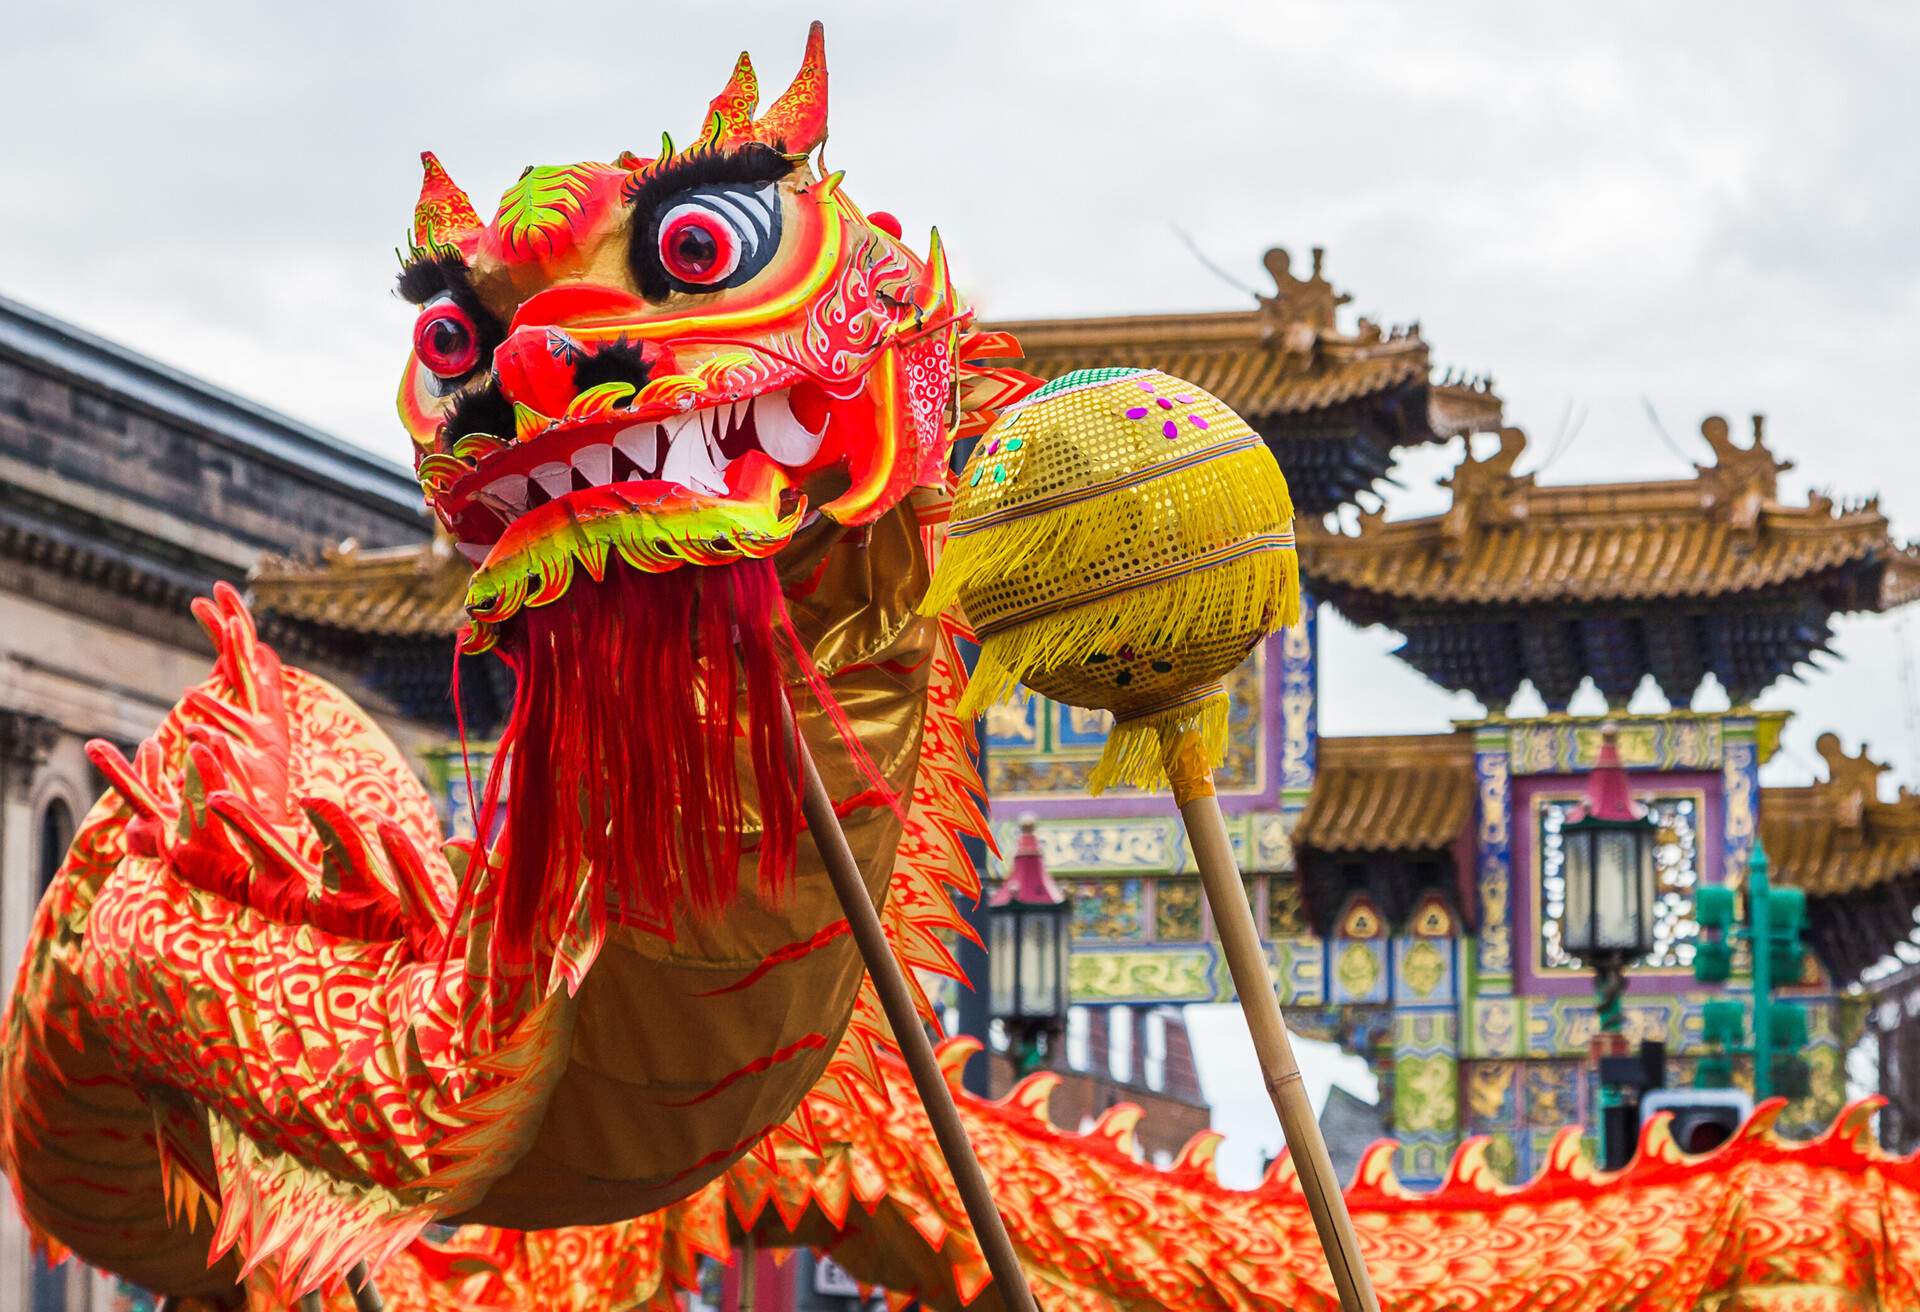 A vibrant dragon with ornamental pieces dancing in front of a Chinese temple.